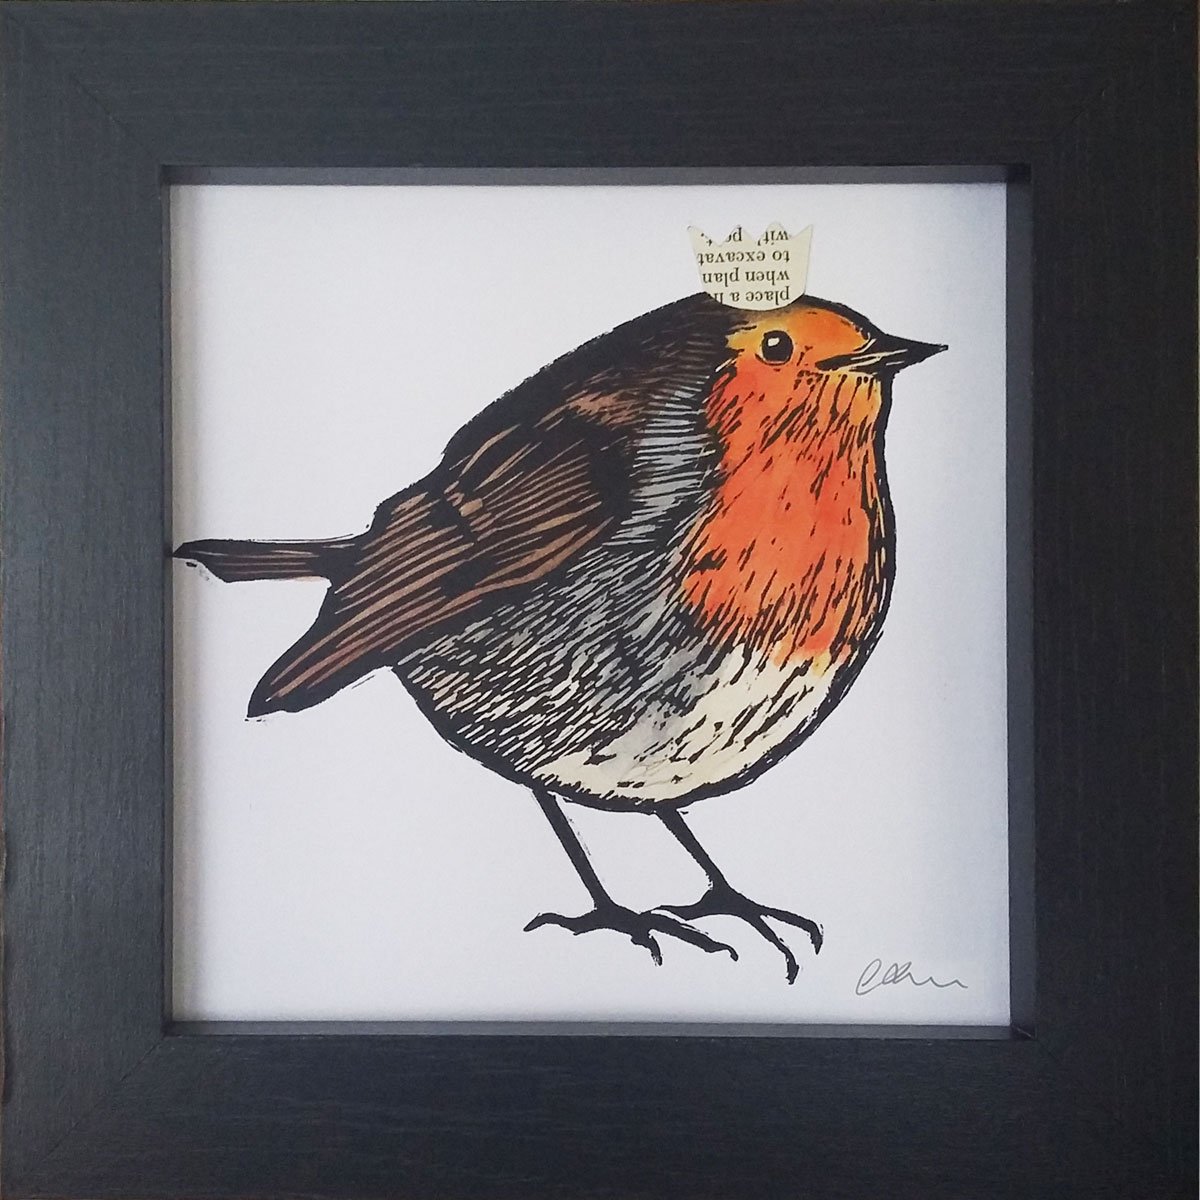 Red Red Robin - variable edition hand painted linocut print - Framed and ready to hang by Carolynne Coulson